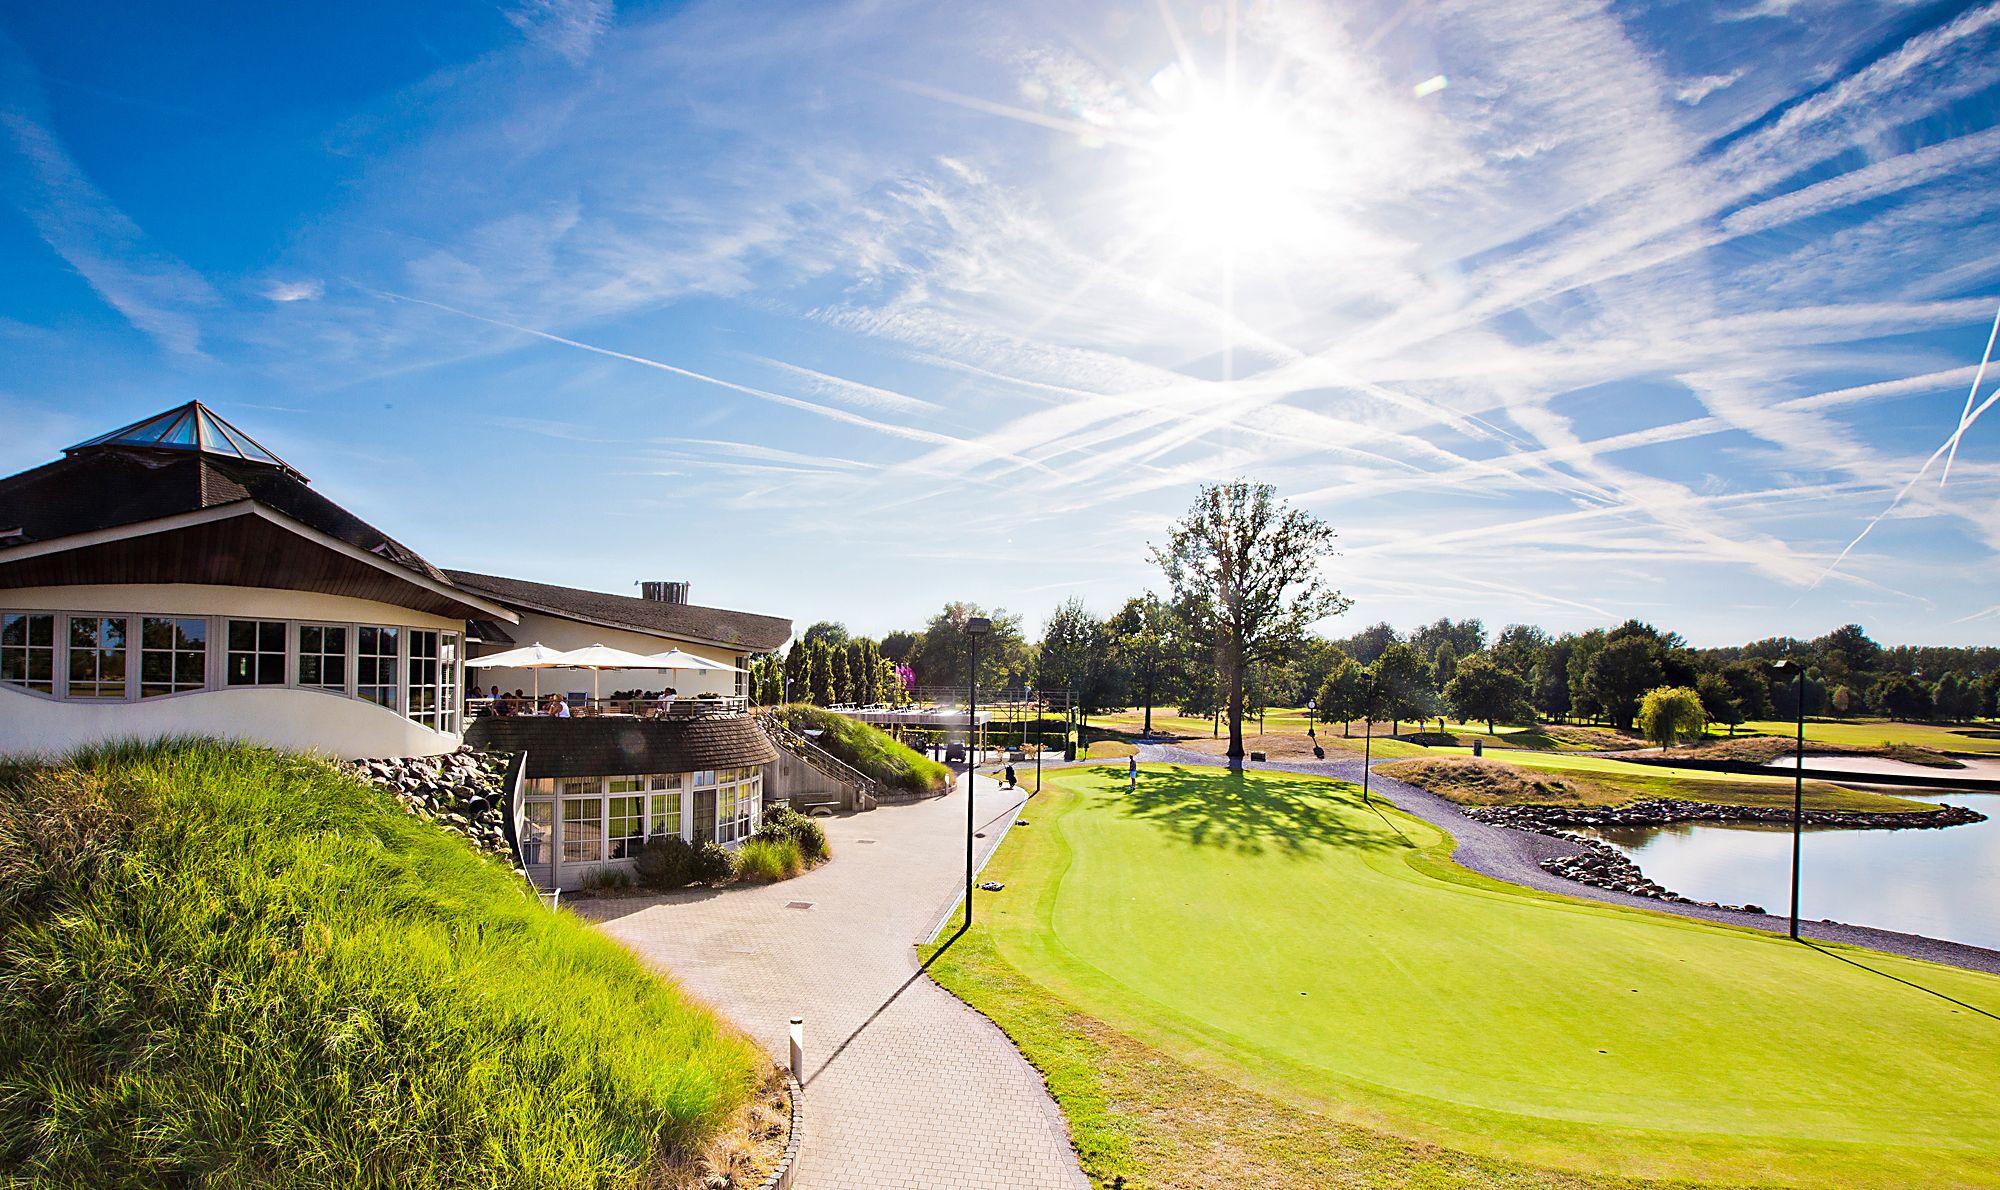 All The Millennium Golf's lovely golf course within stunning Brussels Waterloo & Mons.